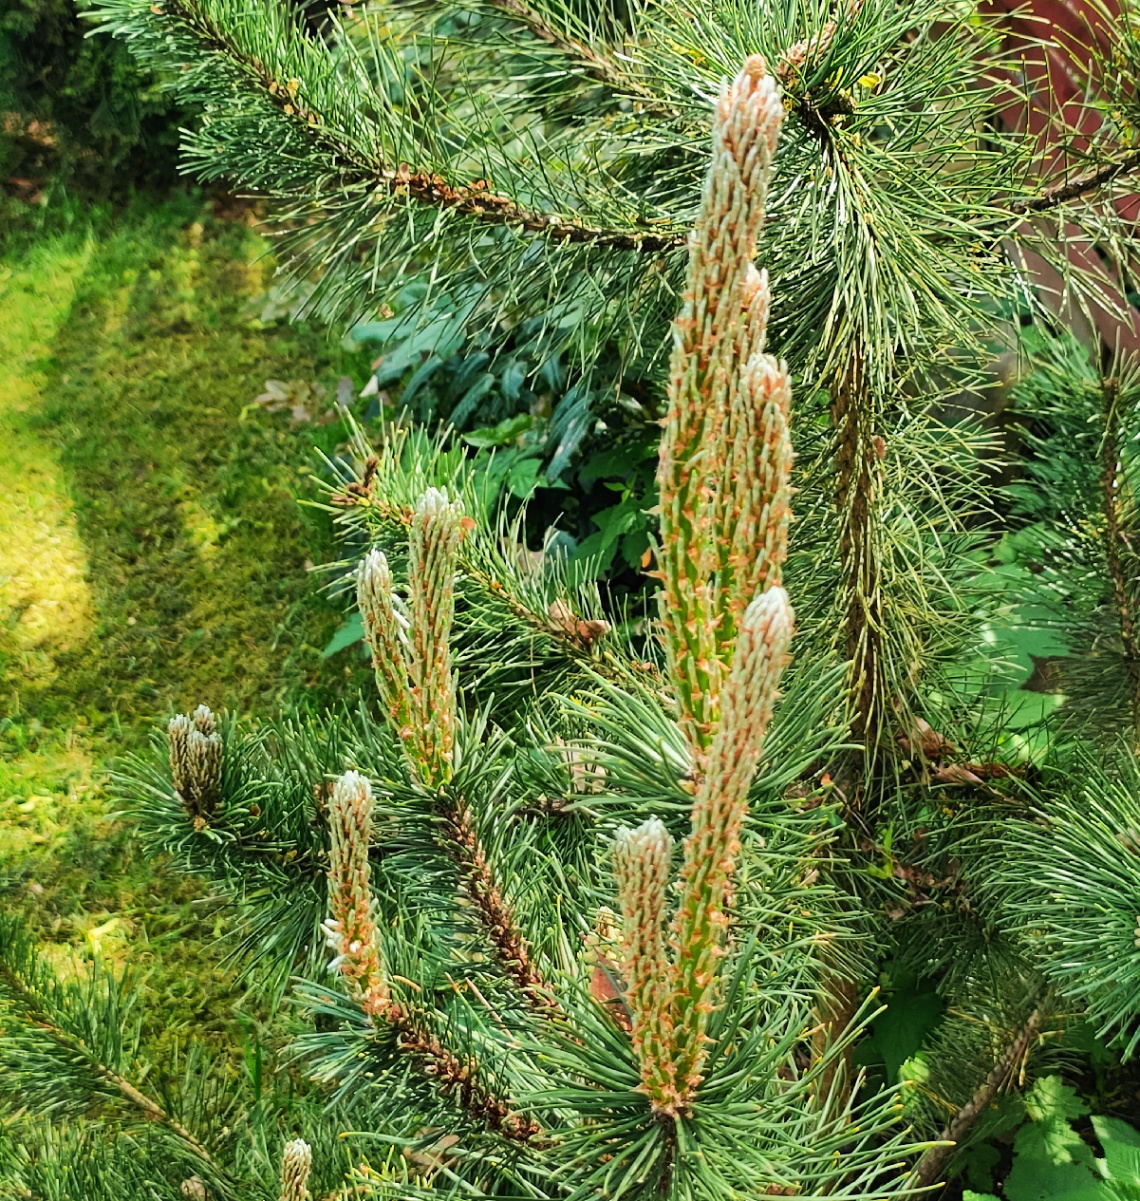 PINE TREE WITH NEW GROWTHS